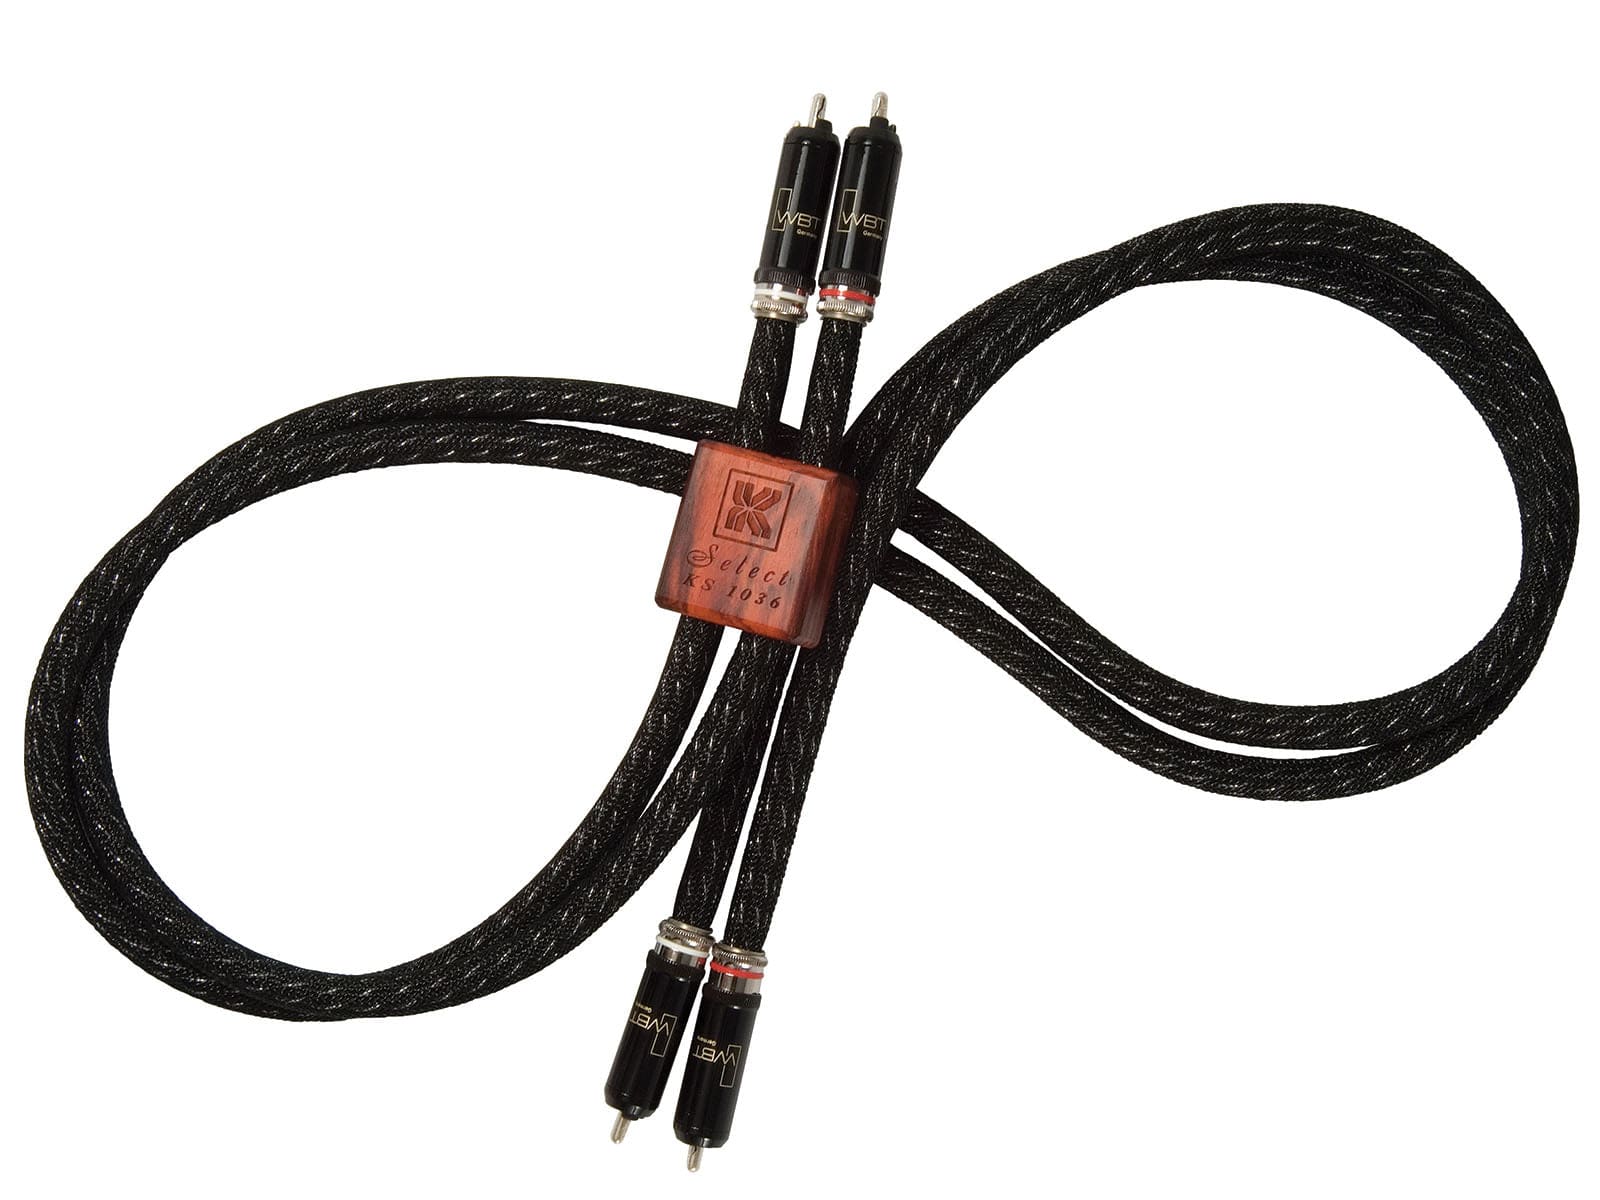 Kimber Kable Select Series Ks1036 Silver Rca Interconnects (Pair) - Wbt Connectors New Cables